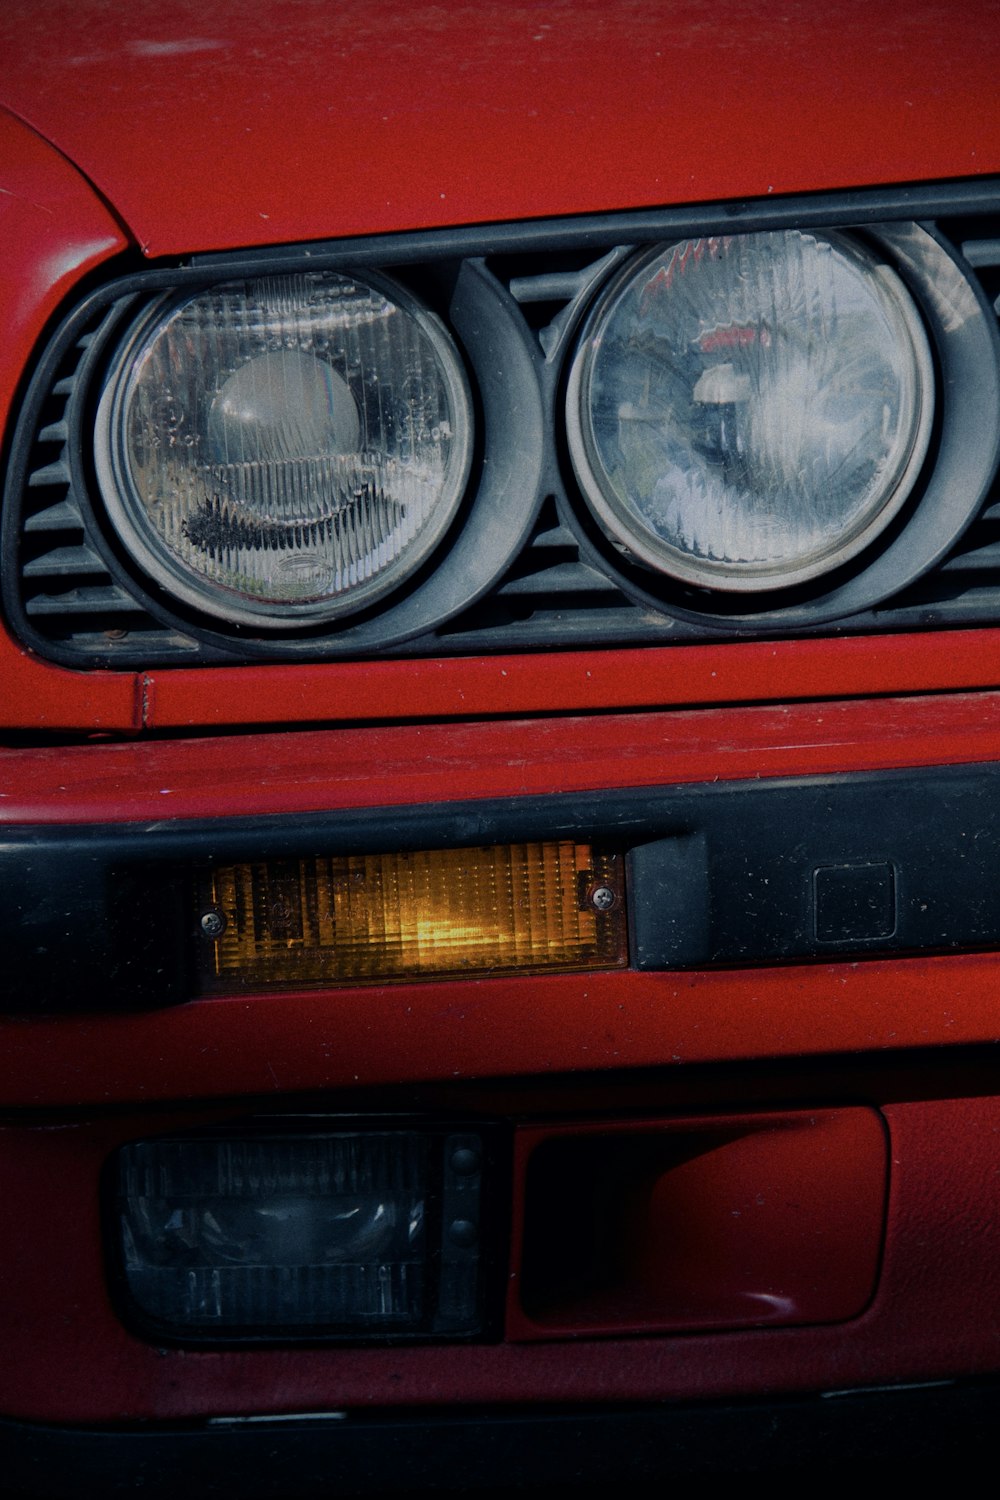 a close up of a red car's headlights